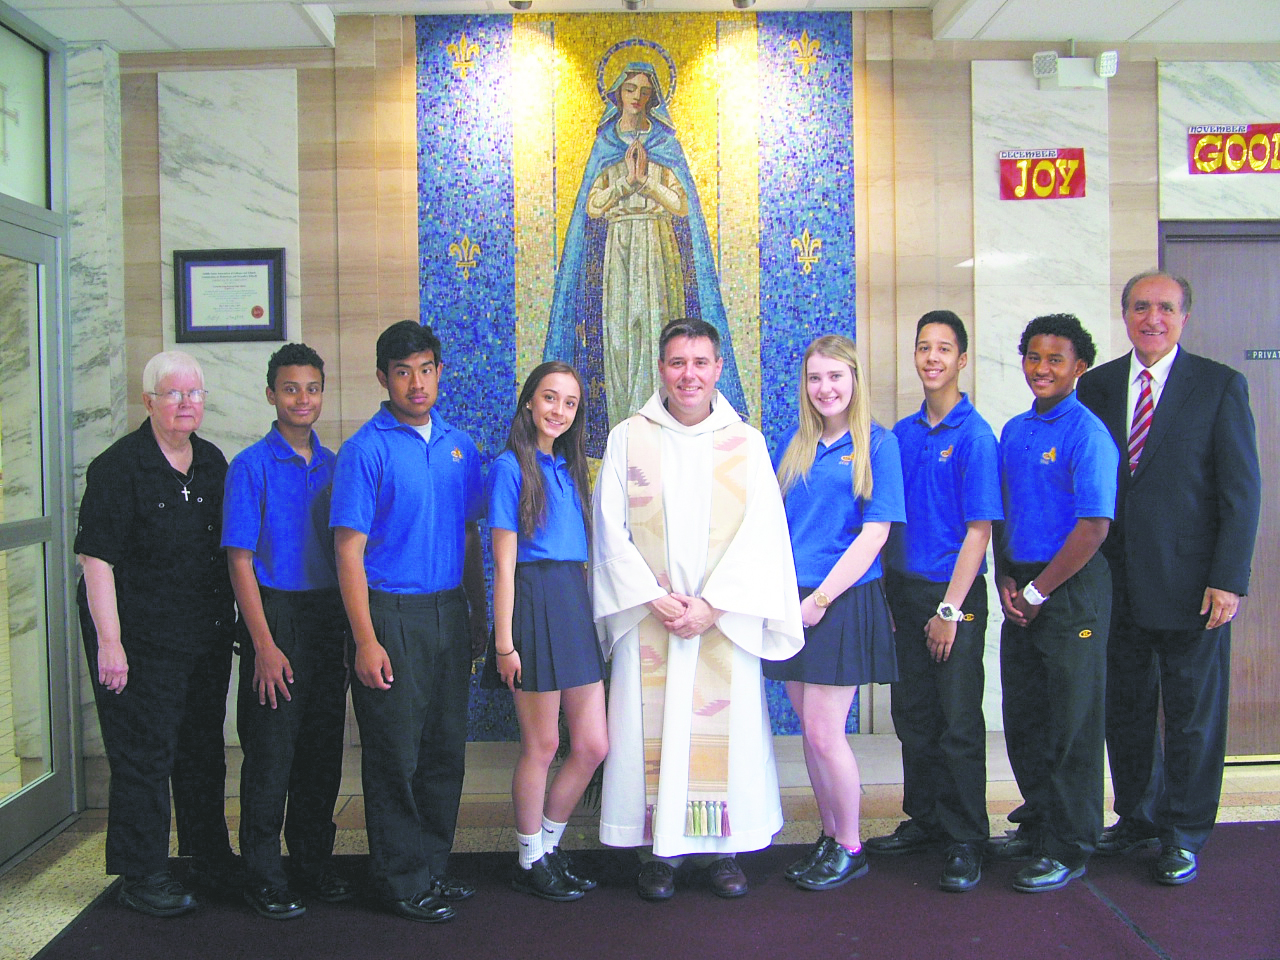 Pictured above are installed extraordinary ministers of Holy Communion from Christ the King R.H.S., Middle Village: Aaron Arana, Edison Cahuana, Meagan Fontanez, Juan Obregon, Elizabeth Quagliariello and Frankelly Rosado, along with Principal Peter Mannarino, Father Frank Spacek, chaplain, and campus minister Sister Elizabeth Graham, C.S.J.  